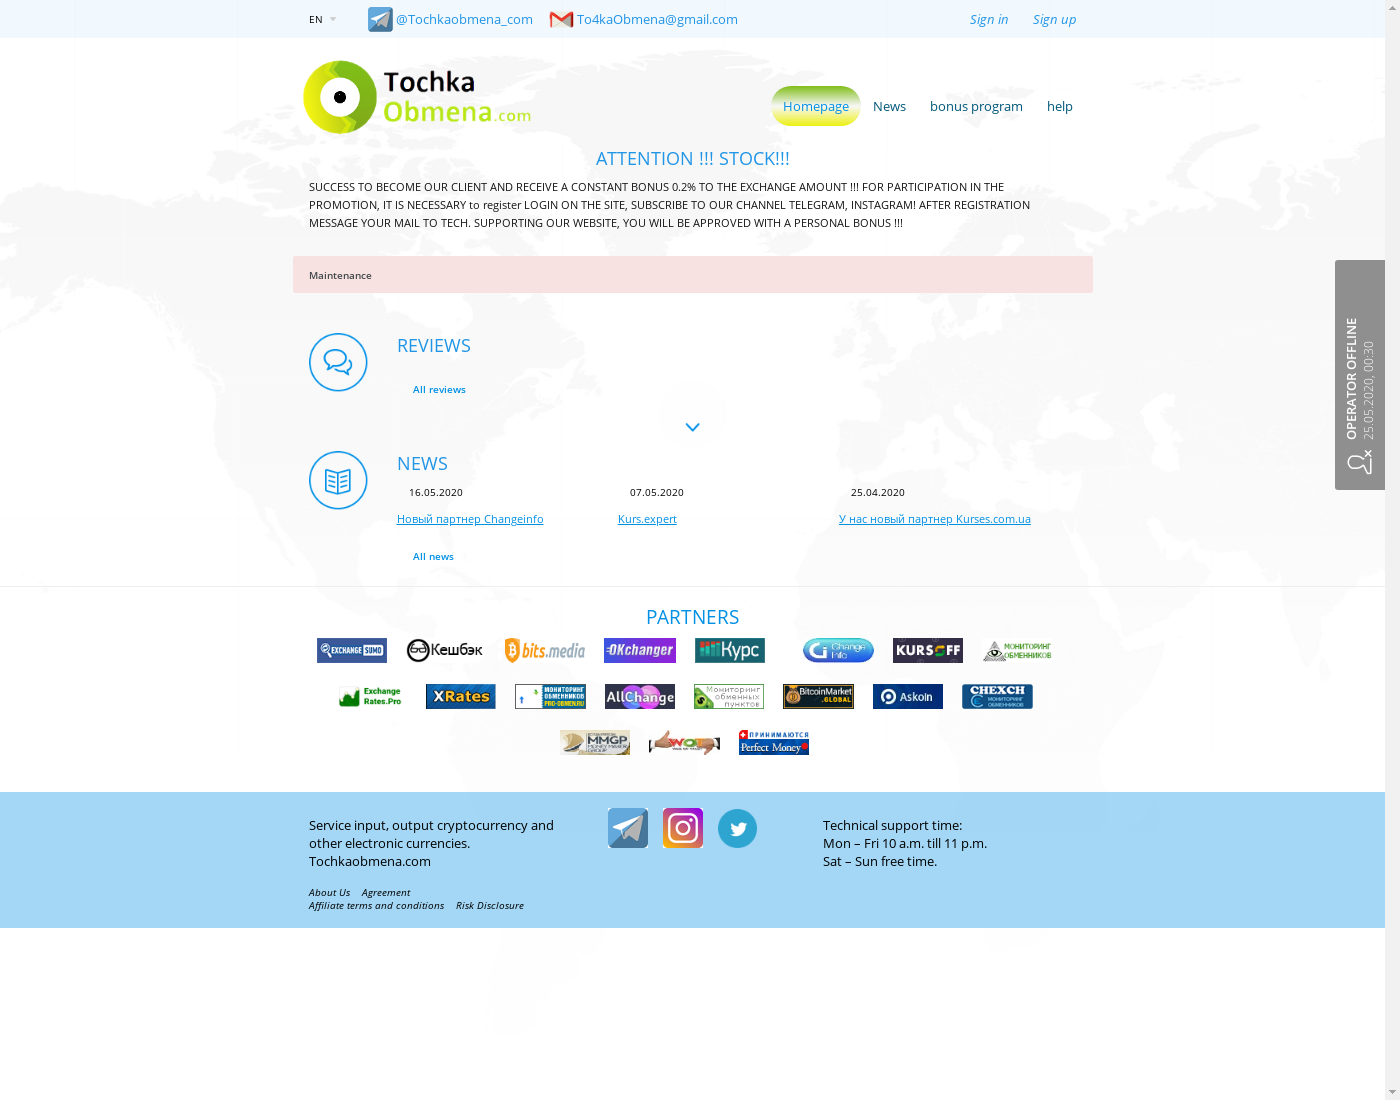 TochkaObmena user interface: the home page in English